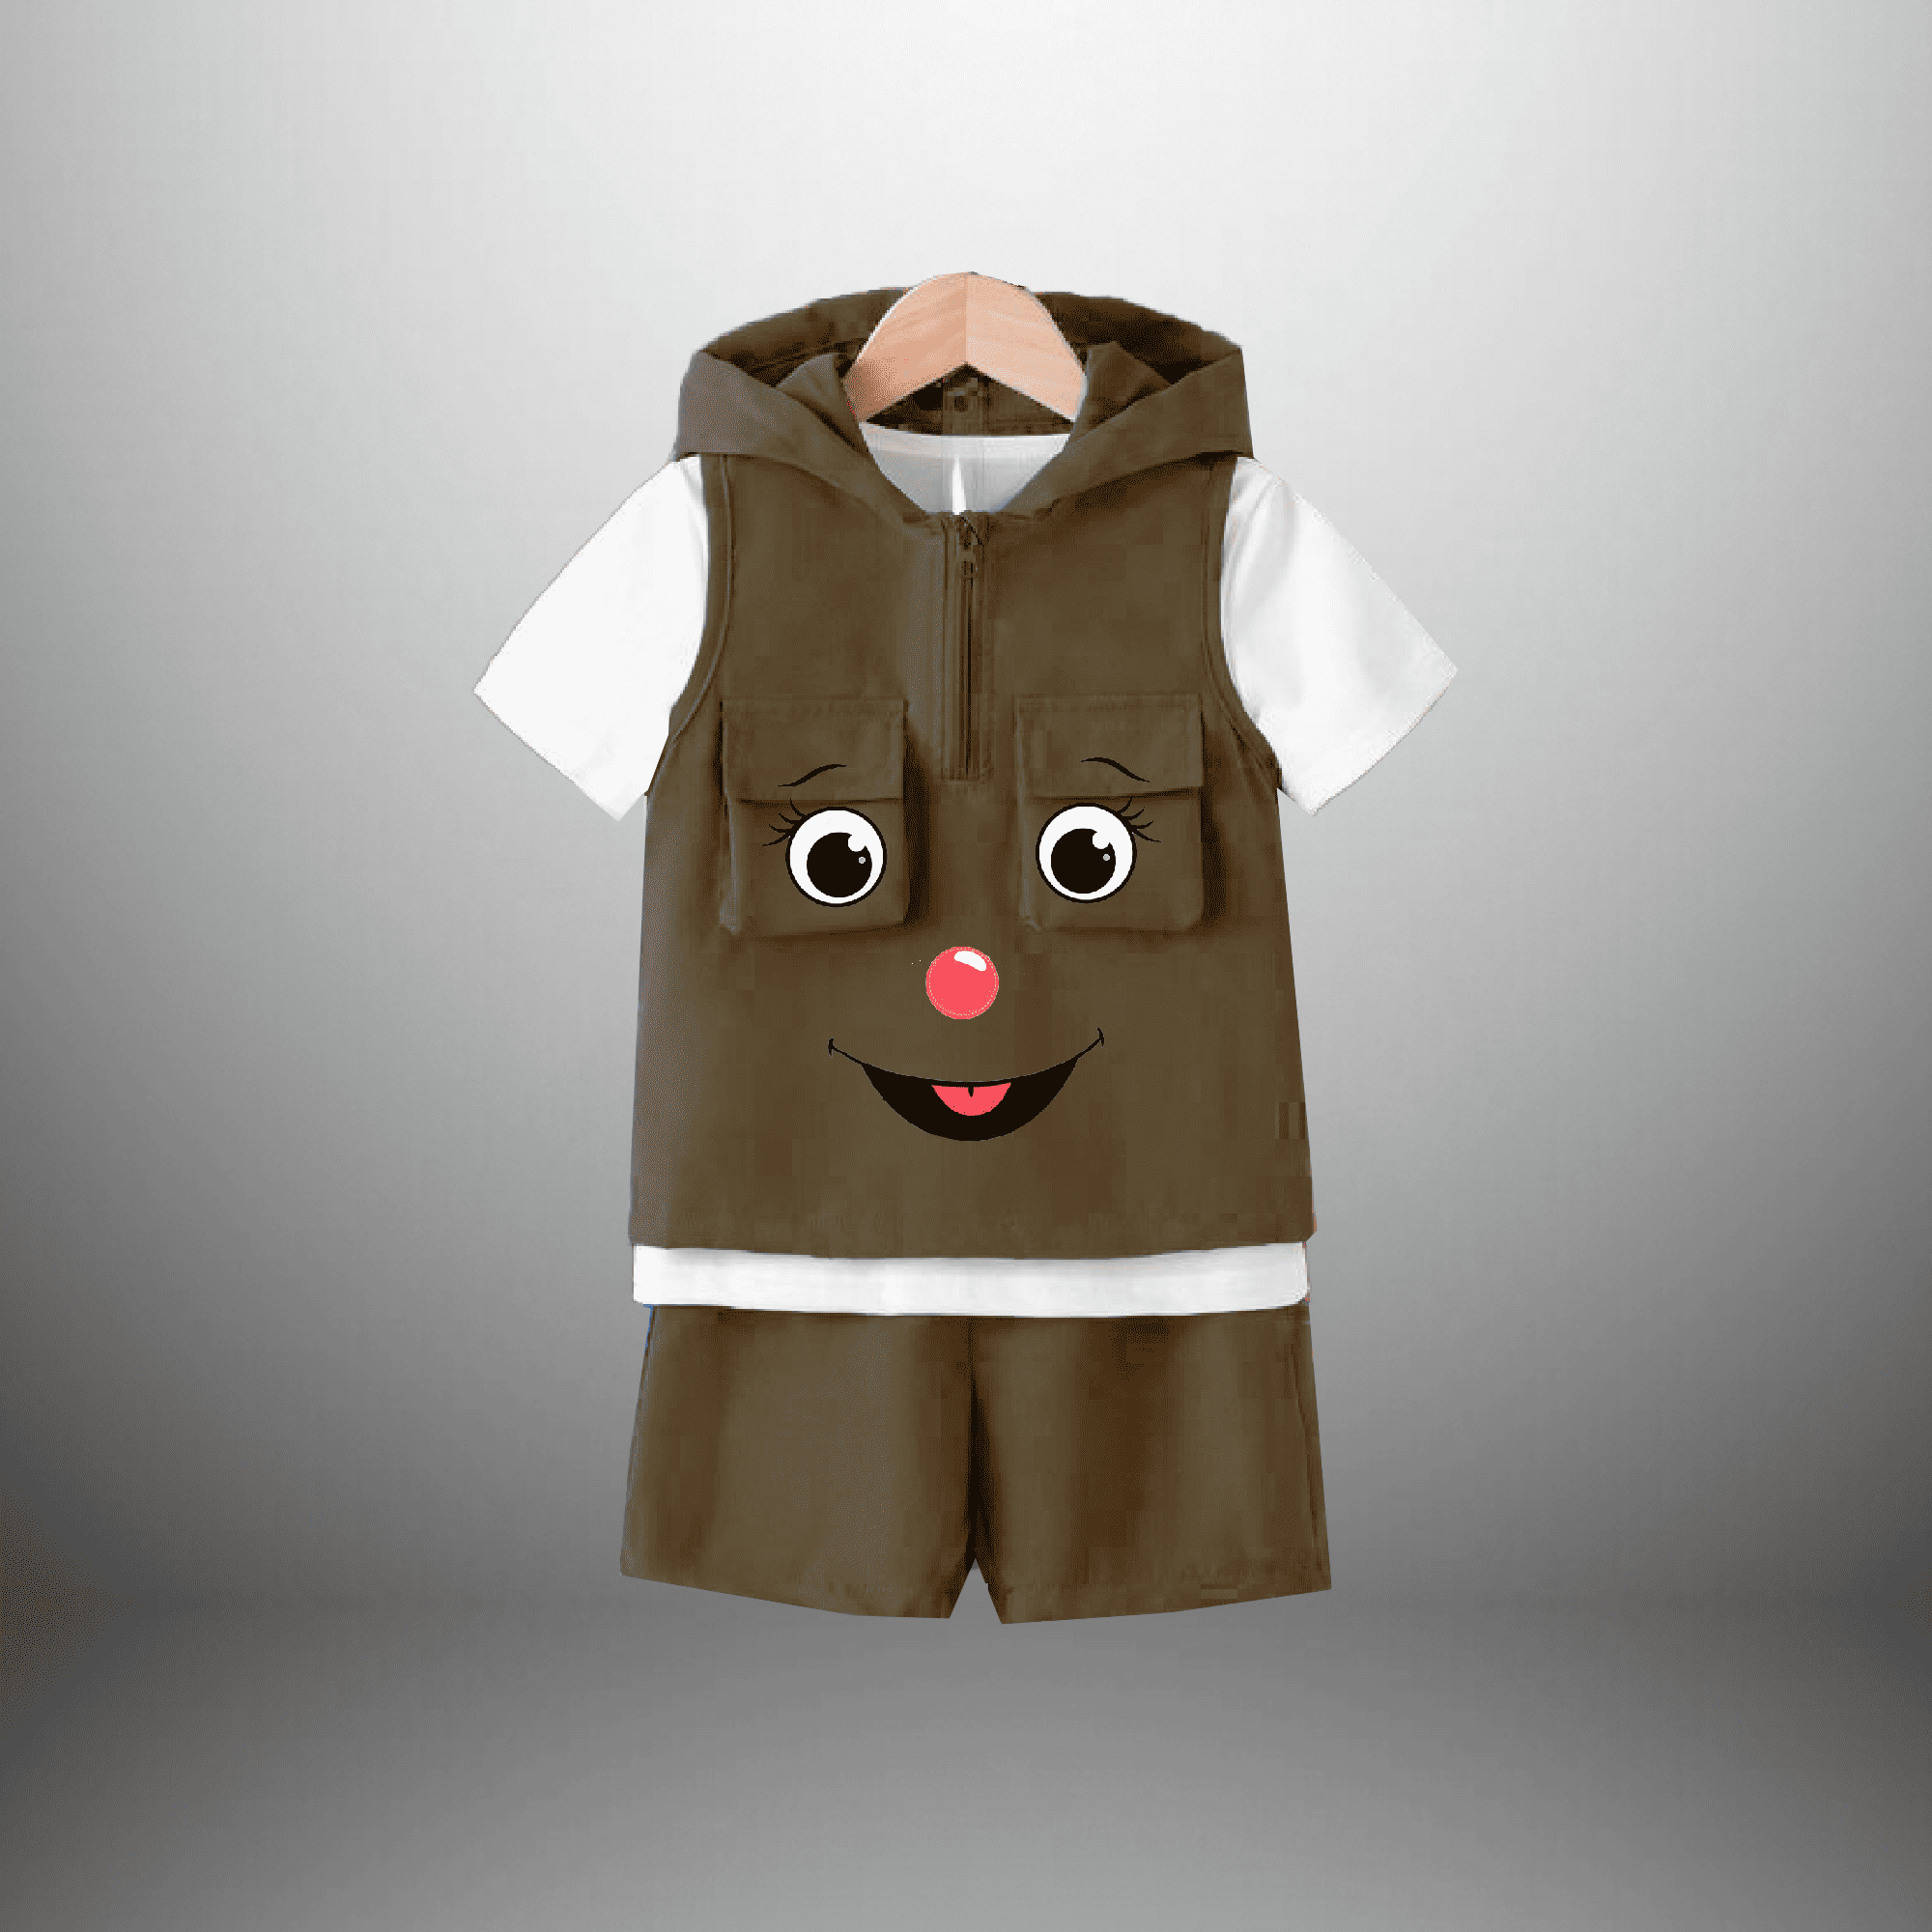 Boy's 3 piece set with white t-shirt, Brown shorts and a sleeveless Hooded jacket-RKFCW493